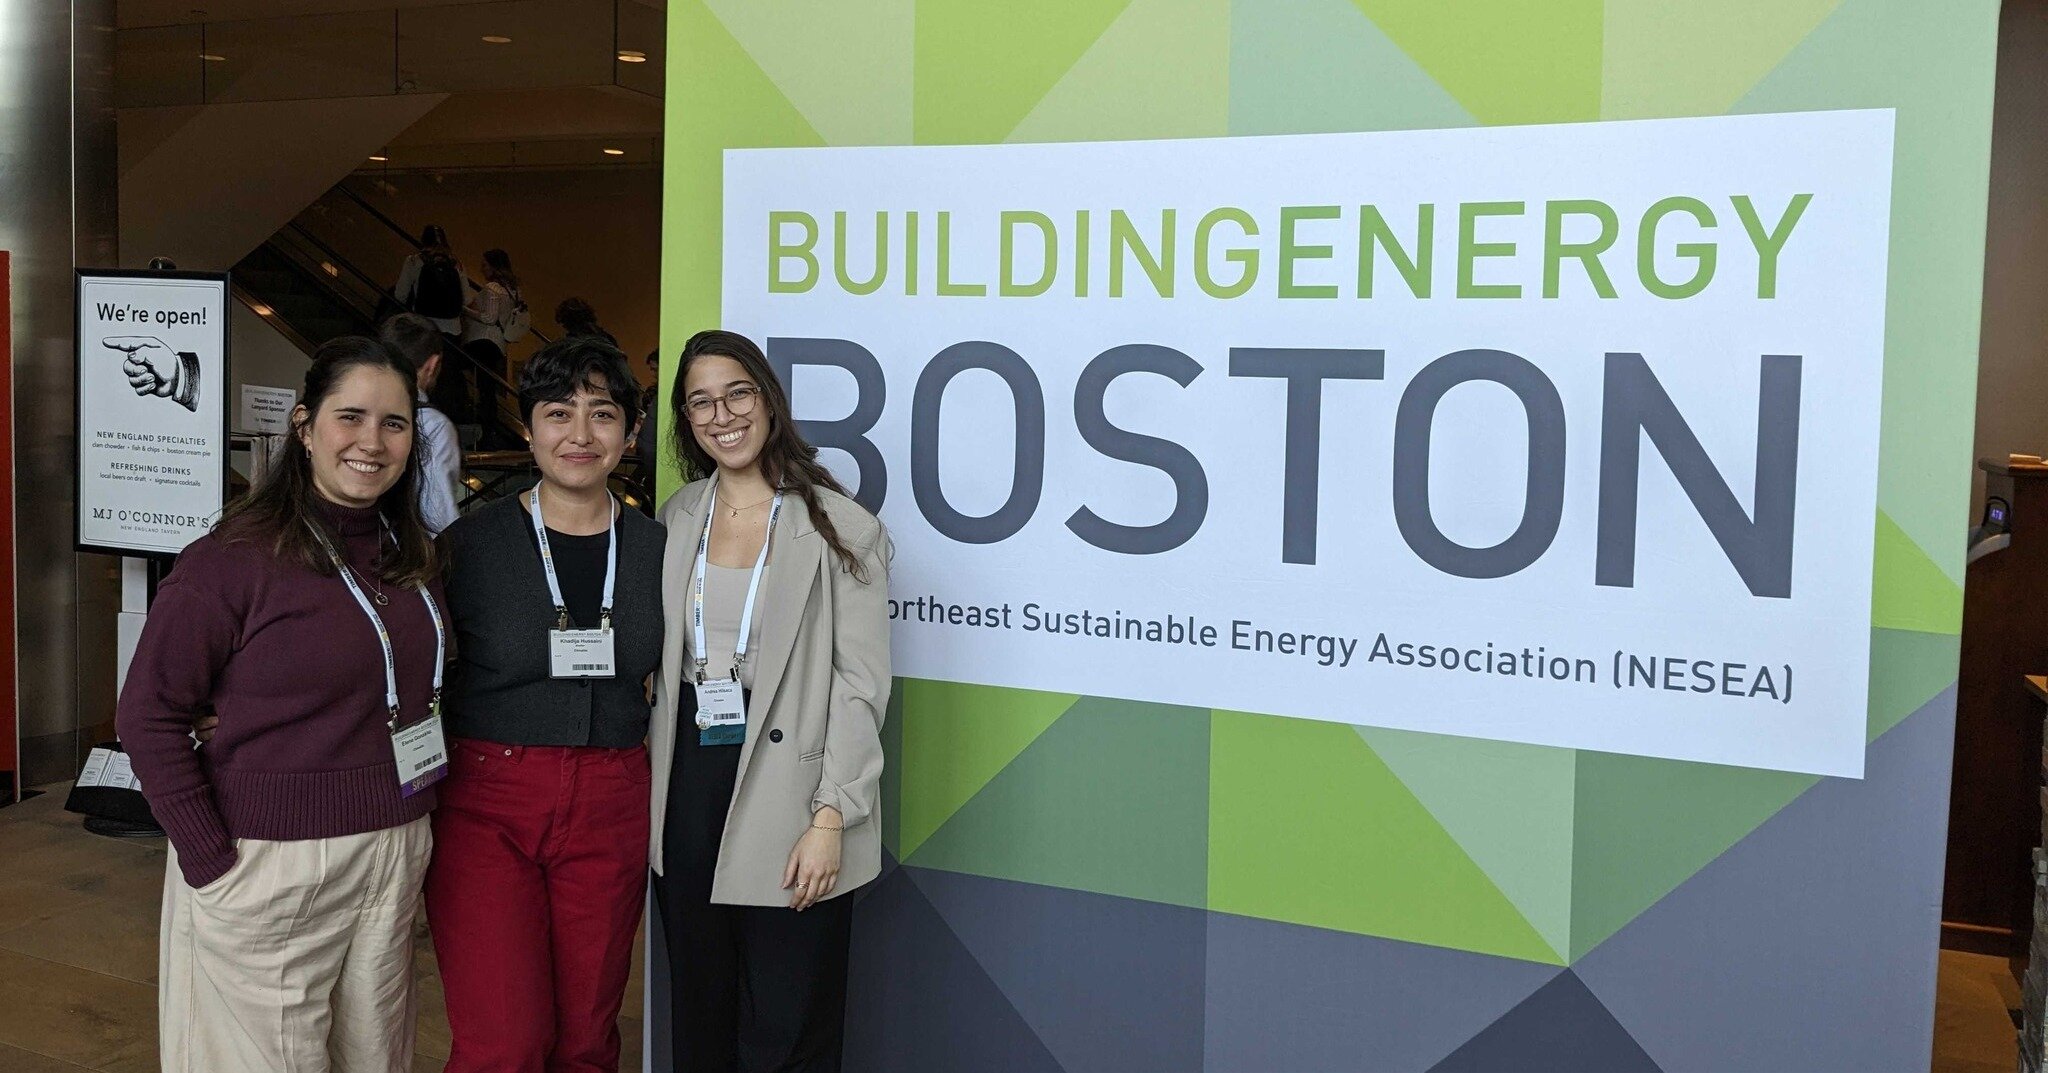 Last week, Elena represented Climable as panelist at the Northeast Sustainable Energy Association's #buildingenergyboston2024 conference along with our Chinatown community partners!

Elena and co. discussed how our microgrid model provides energy rel